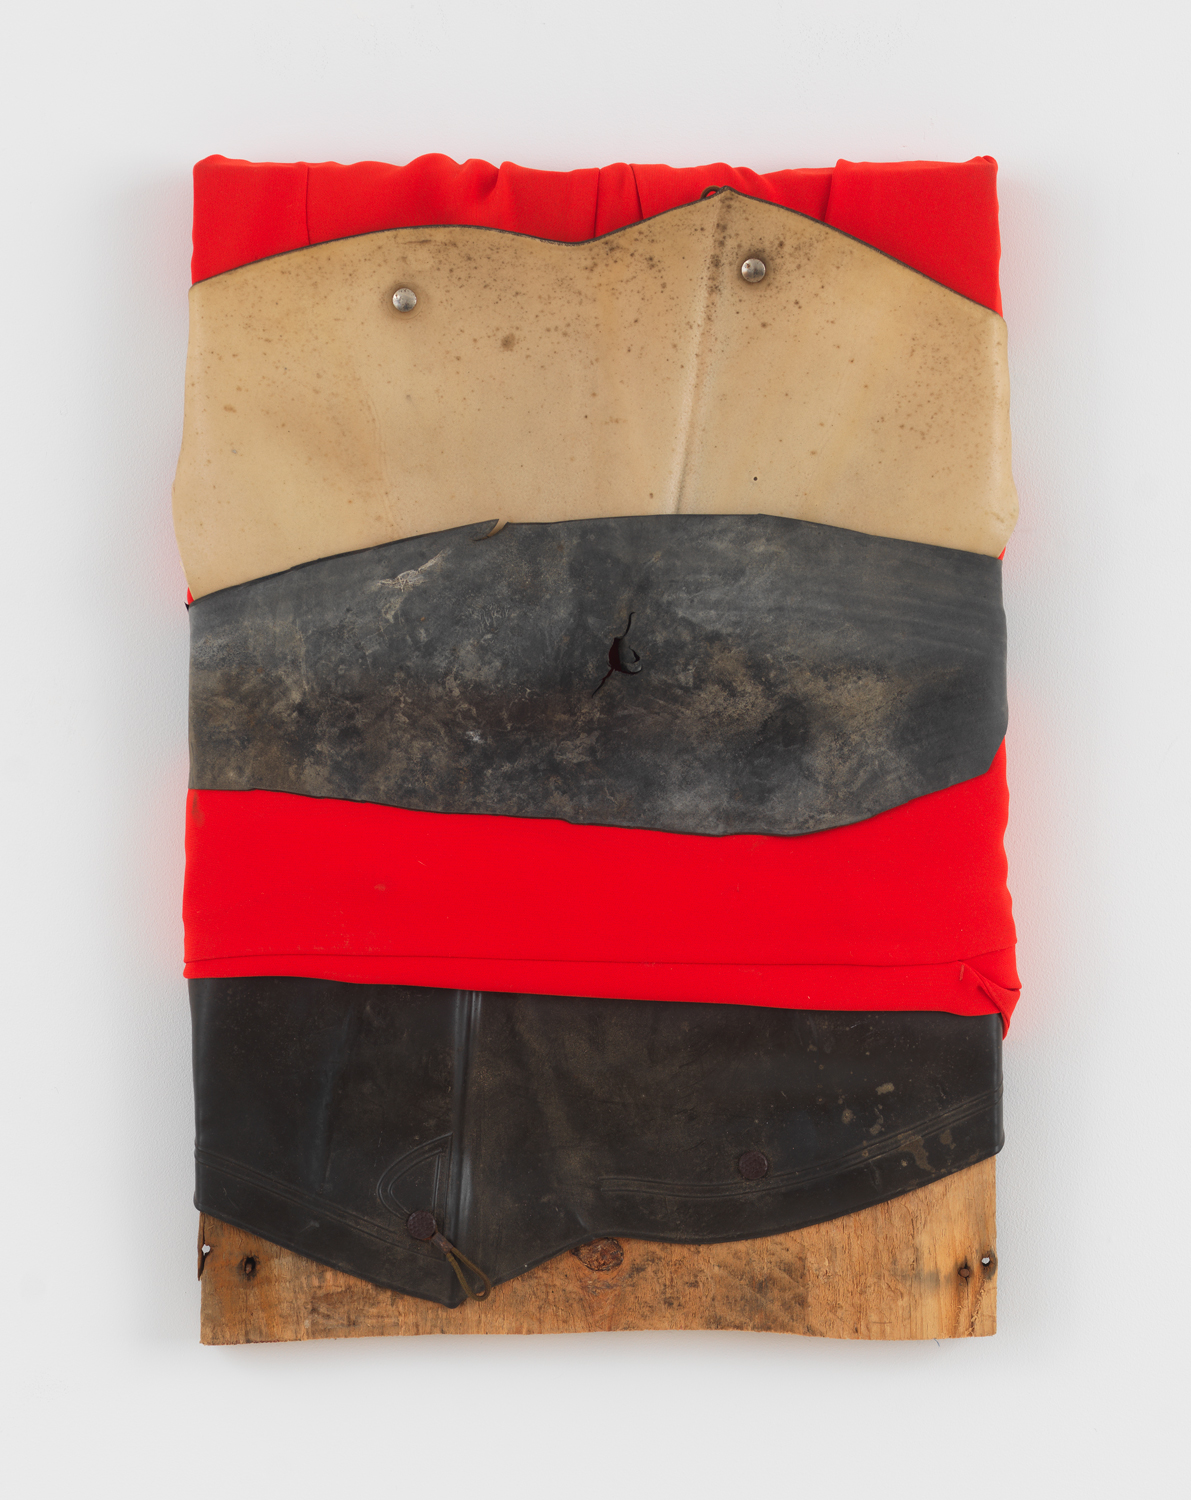 Dan Dowd, Where have you been? Boots, 2023, Found boot rubber and cotton shirt on found board, 21 x 15 x 2 in.